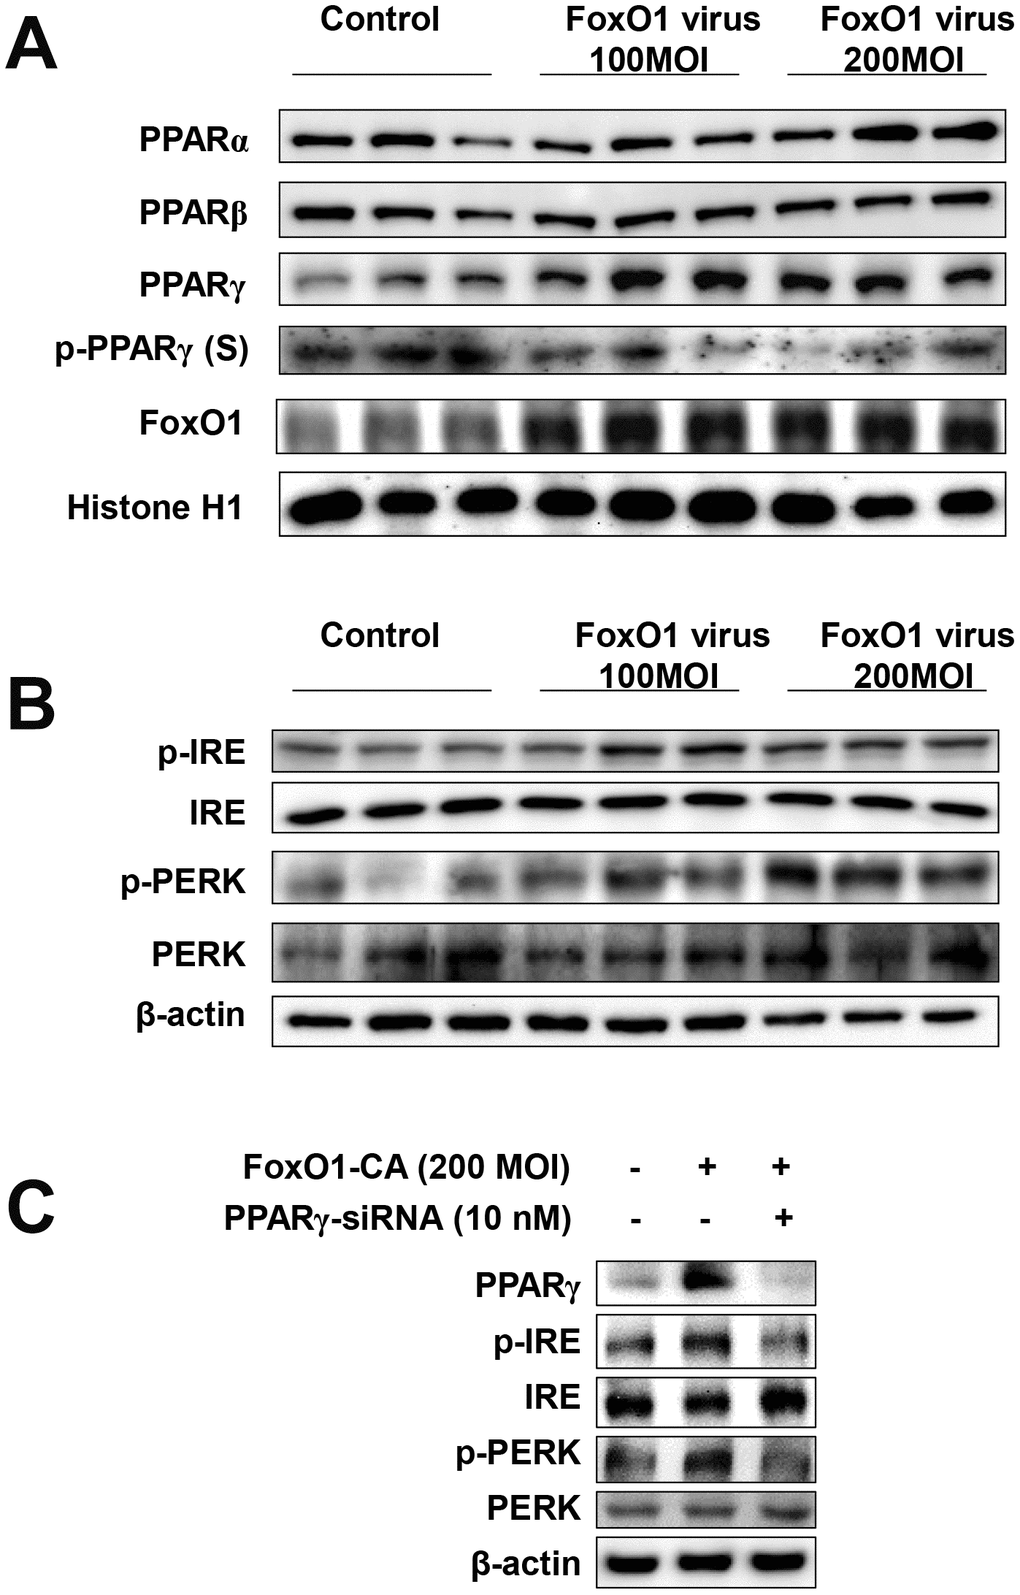 FoxO1 regulates ER stress through PPARγ in FoxO1-virus treated cells. (A) Activation of PPARγ by FoxO1. AC2F cells were grown to 80% confluence in 100 mm dishes in DMEM, and then stimulated with 100 and 200 MOI FoxO1 and analyzed by western blotting using the appropriate antibody. (B) FoxO1-induced activation of ER stress genes. Western blot was used to detect p-IRE, total-IRE, p-PERK, and total-PERK in cytoplasmic extracts (20 μg protein) from AC2F cells. (C) AC2F cells were grown to 80% confluence in 100-mm dishes containing DMEM, pretreated (one day) with or without PPARγ-siRNA (10 nM), then stimulated with the FoxO1 virus (200 MOI) for 1 days, and Western blot was used to detect PPARγ, p-IRE, total-IRE, p-PERK, and total-PERK in cytoplasmic extracts (20 μg protein) by using the β-actin as a control from AC2F cells.